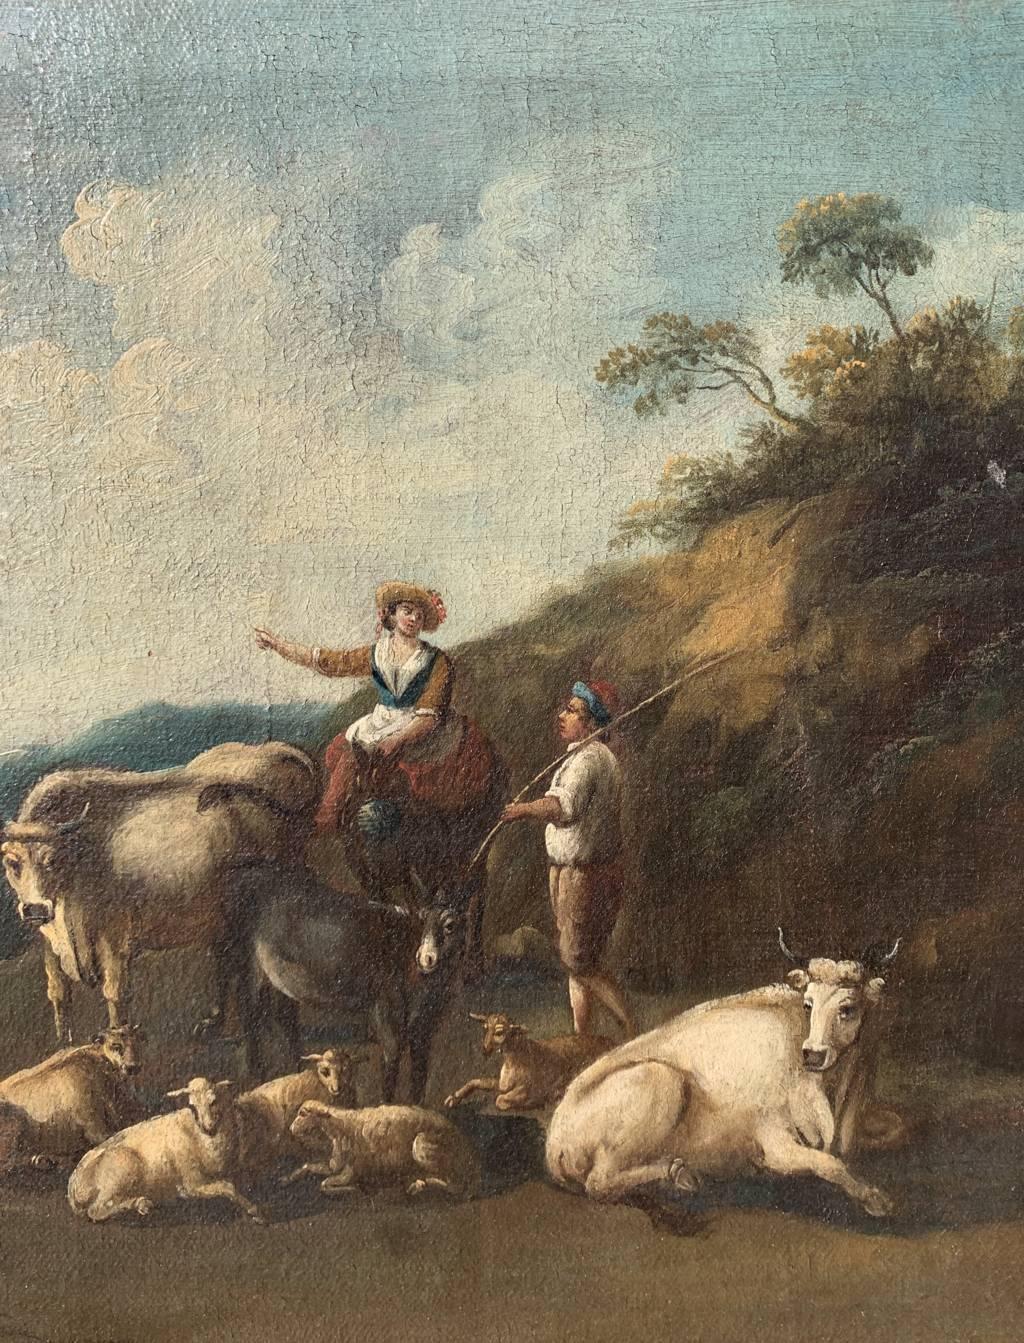 Baroque Italian painter - 18th century landscape painter - Sheperds  - Rococo Painting by Unknown